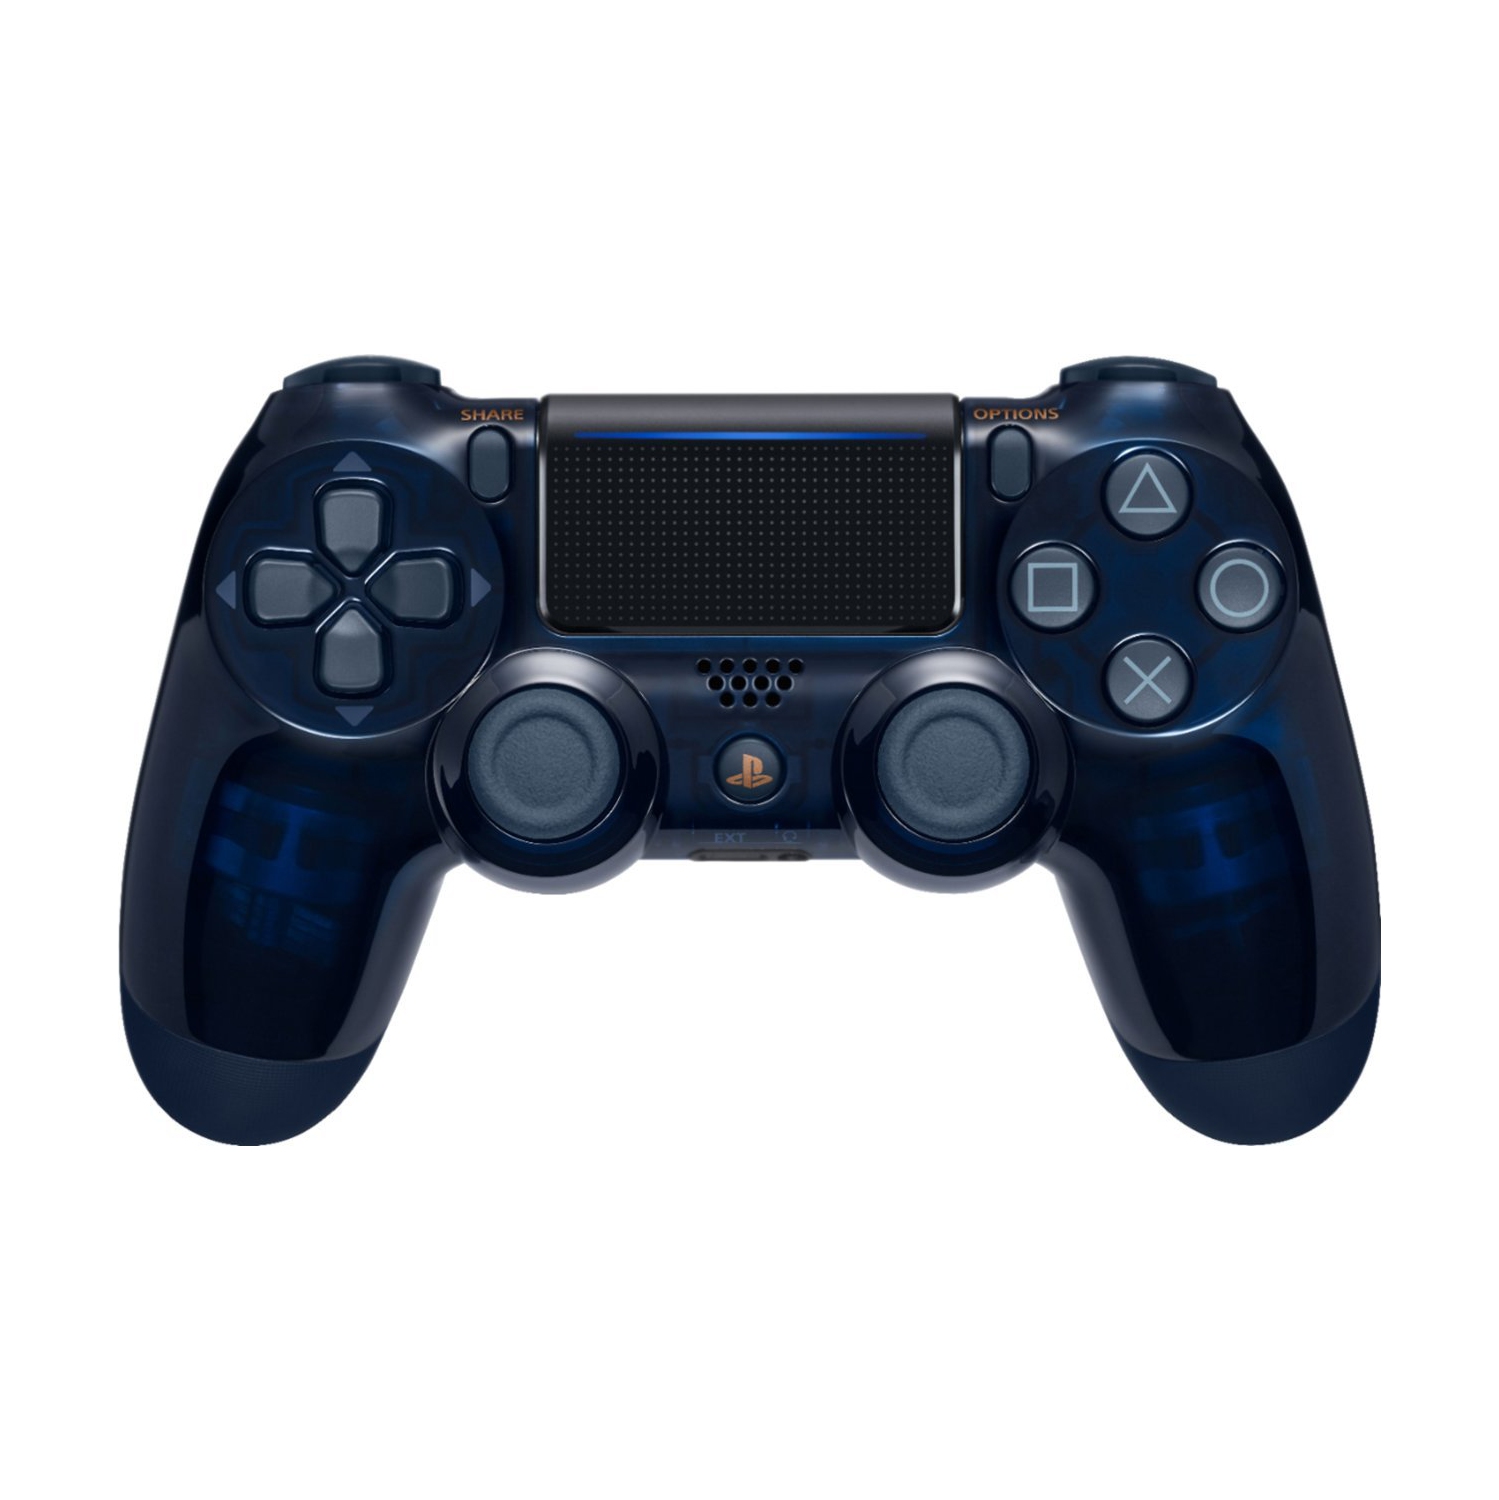 Refurbished (Good) - Sony PlayStation 4 PS4 DualShock 4 Wireless Controller (Limited Edition 500 Million)